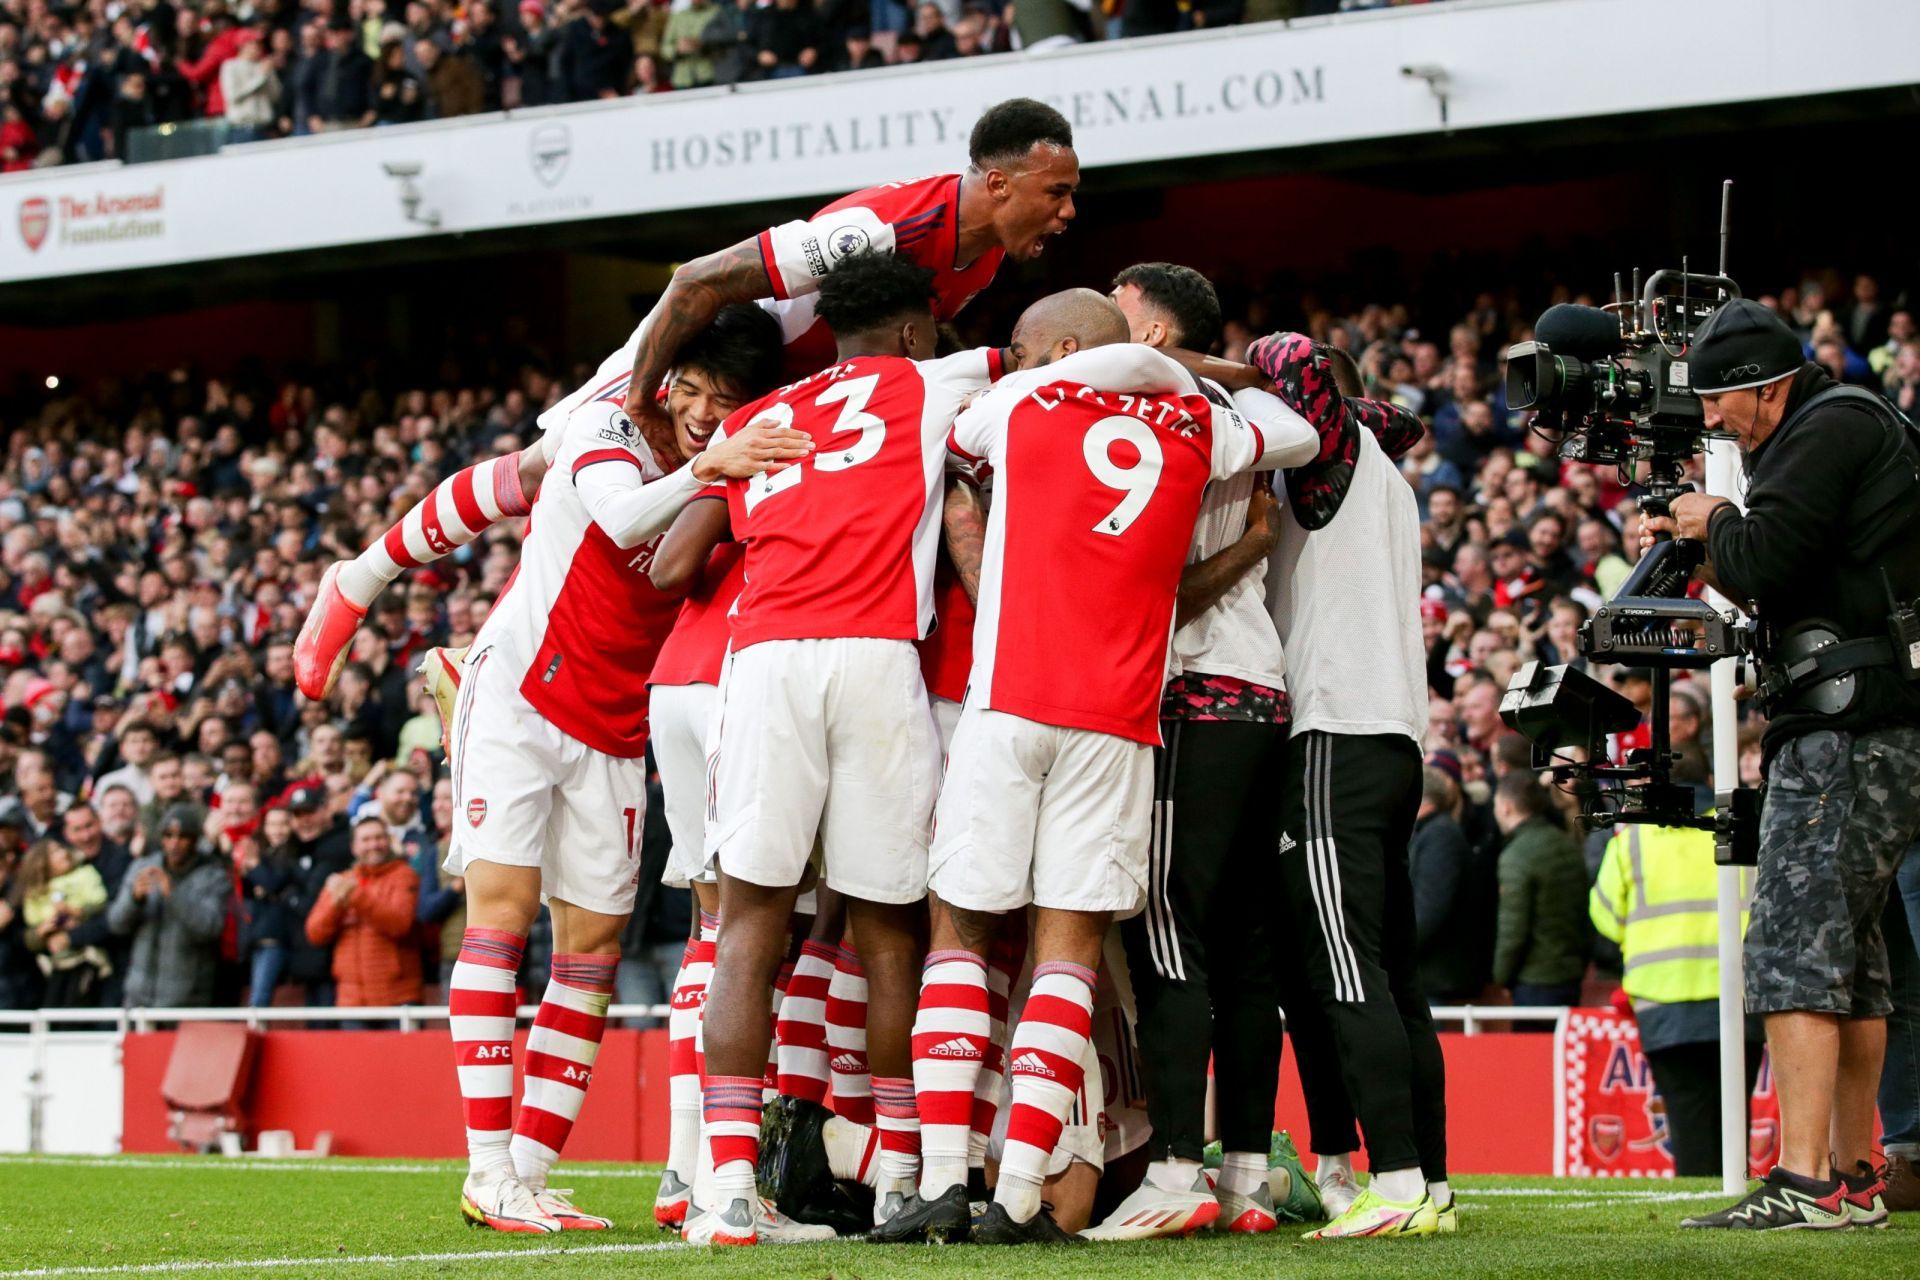 Arsenal beat Watford in their final game before the break